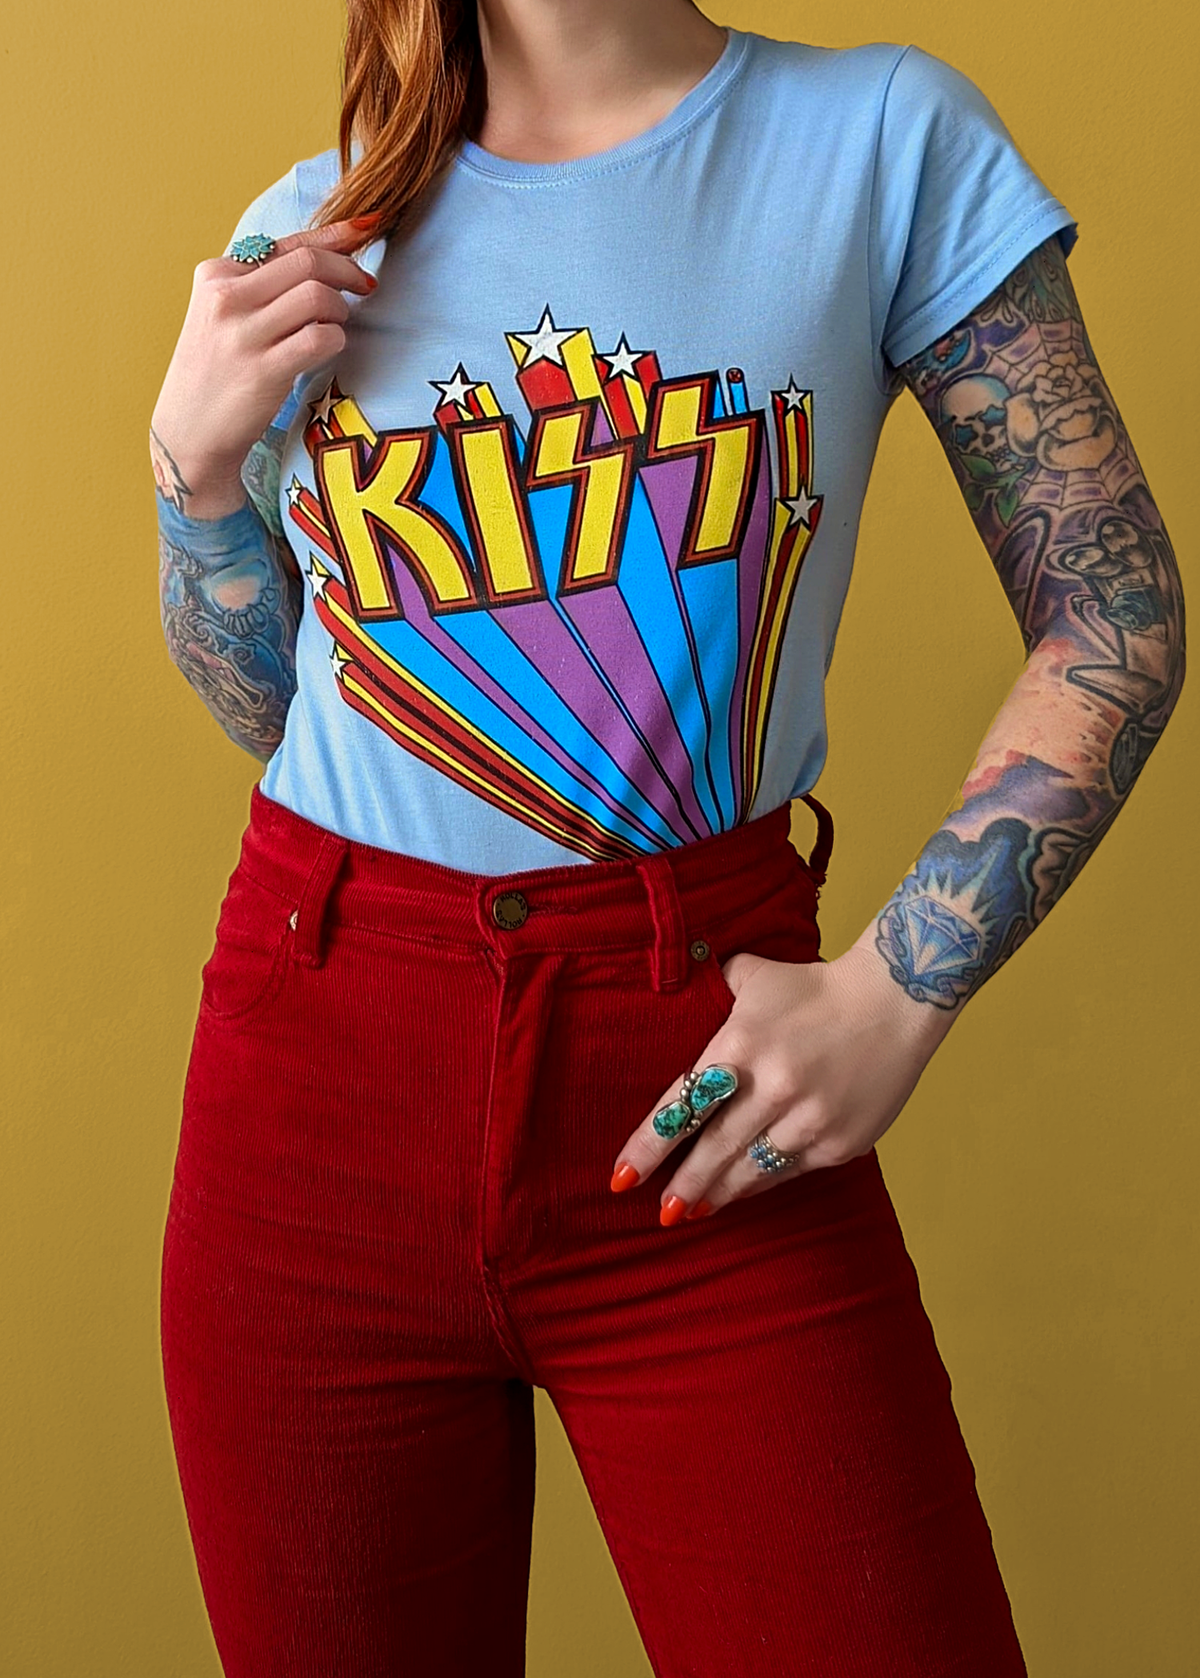 Retro Fitted sky blue KISS band tee with rainbow and stars design in yellow, purple, blue, and red. Officially licensed.